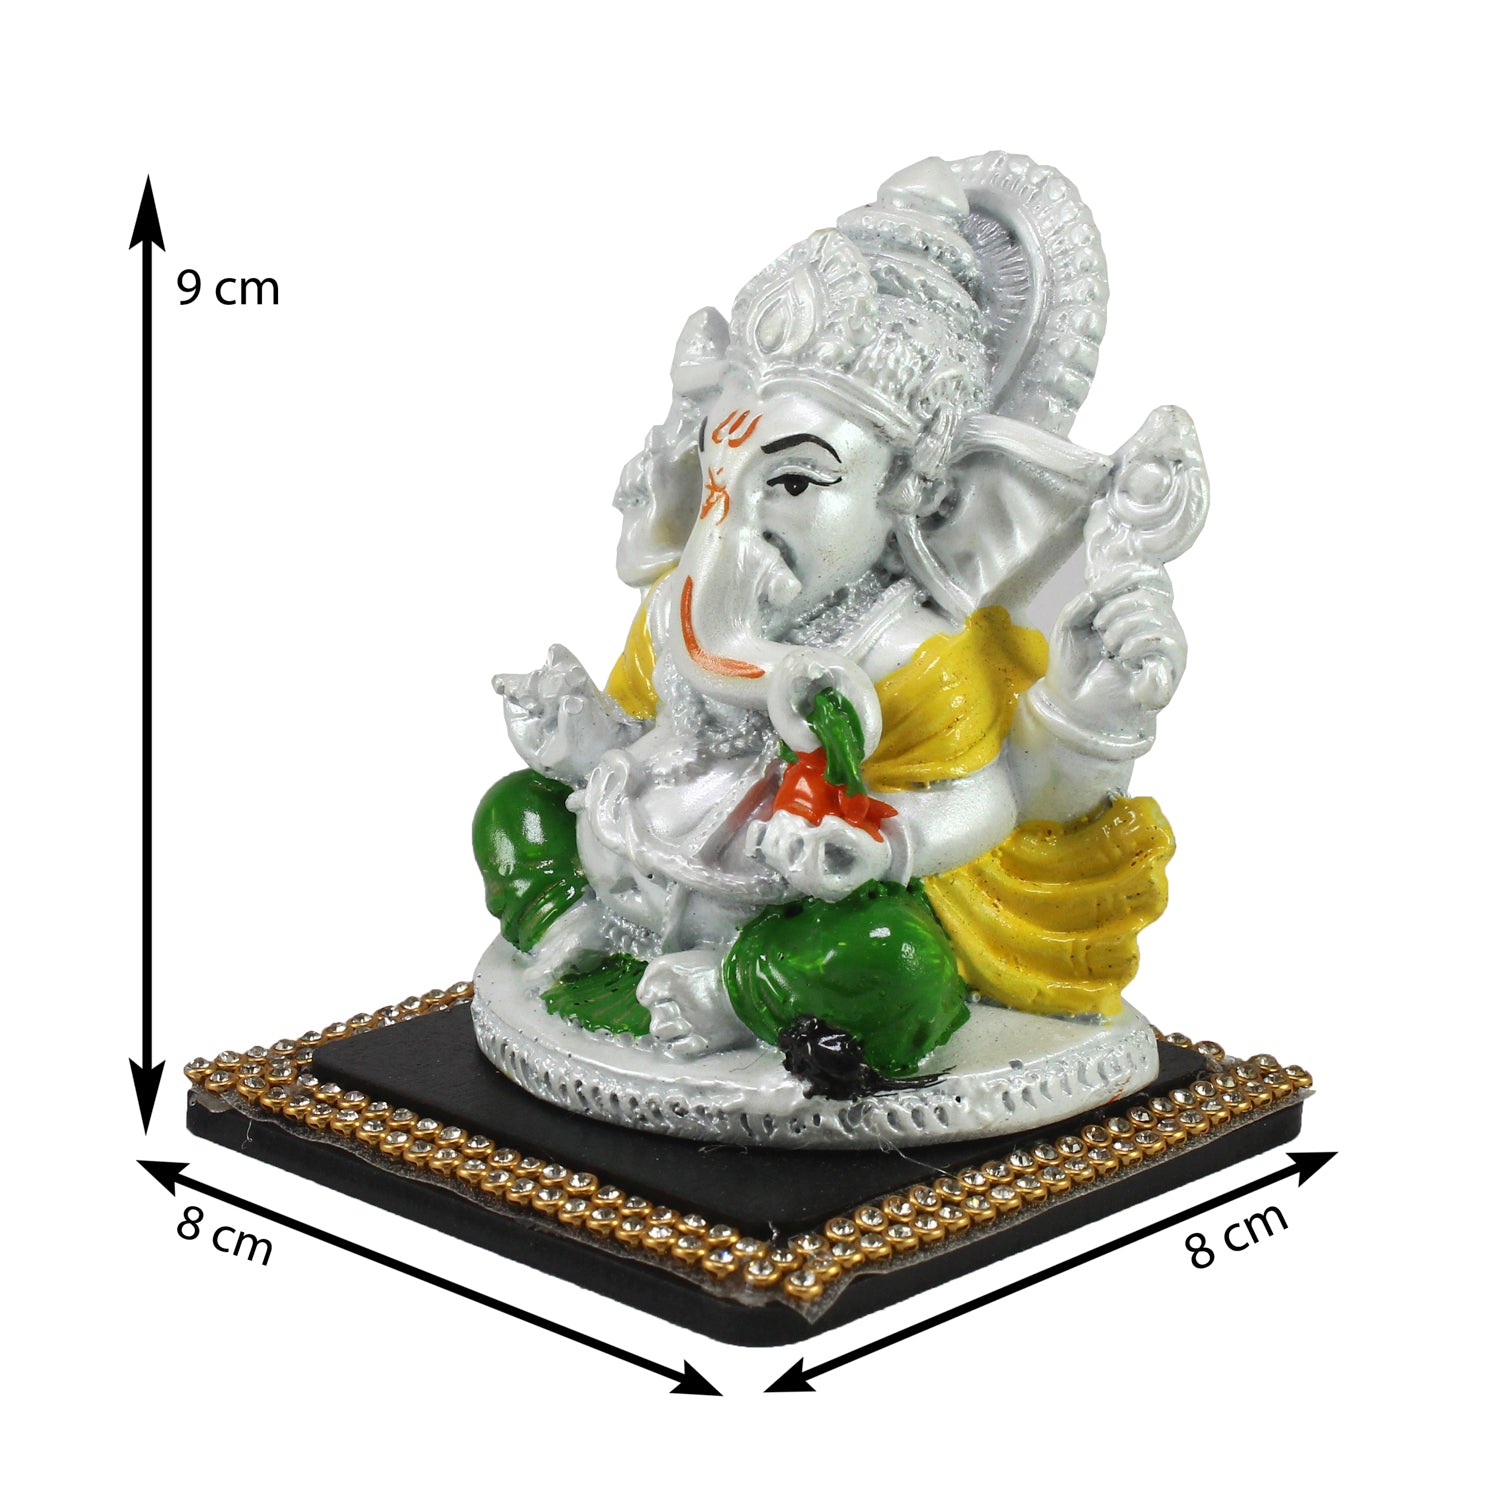 Decorative Lord Ganesha Showpiece for Car Dashboard, Home Temple and Office Desks 2